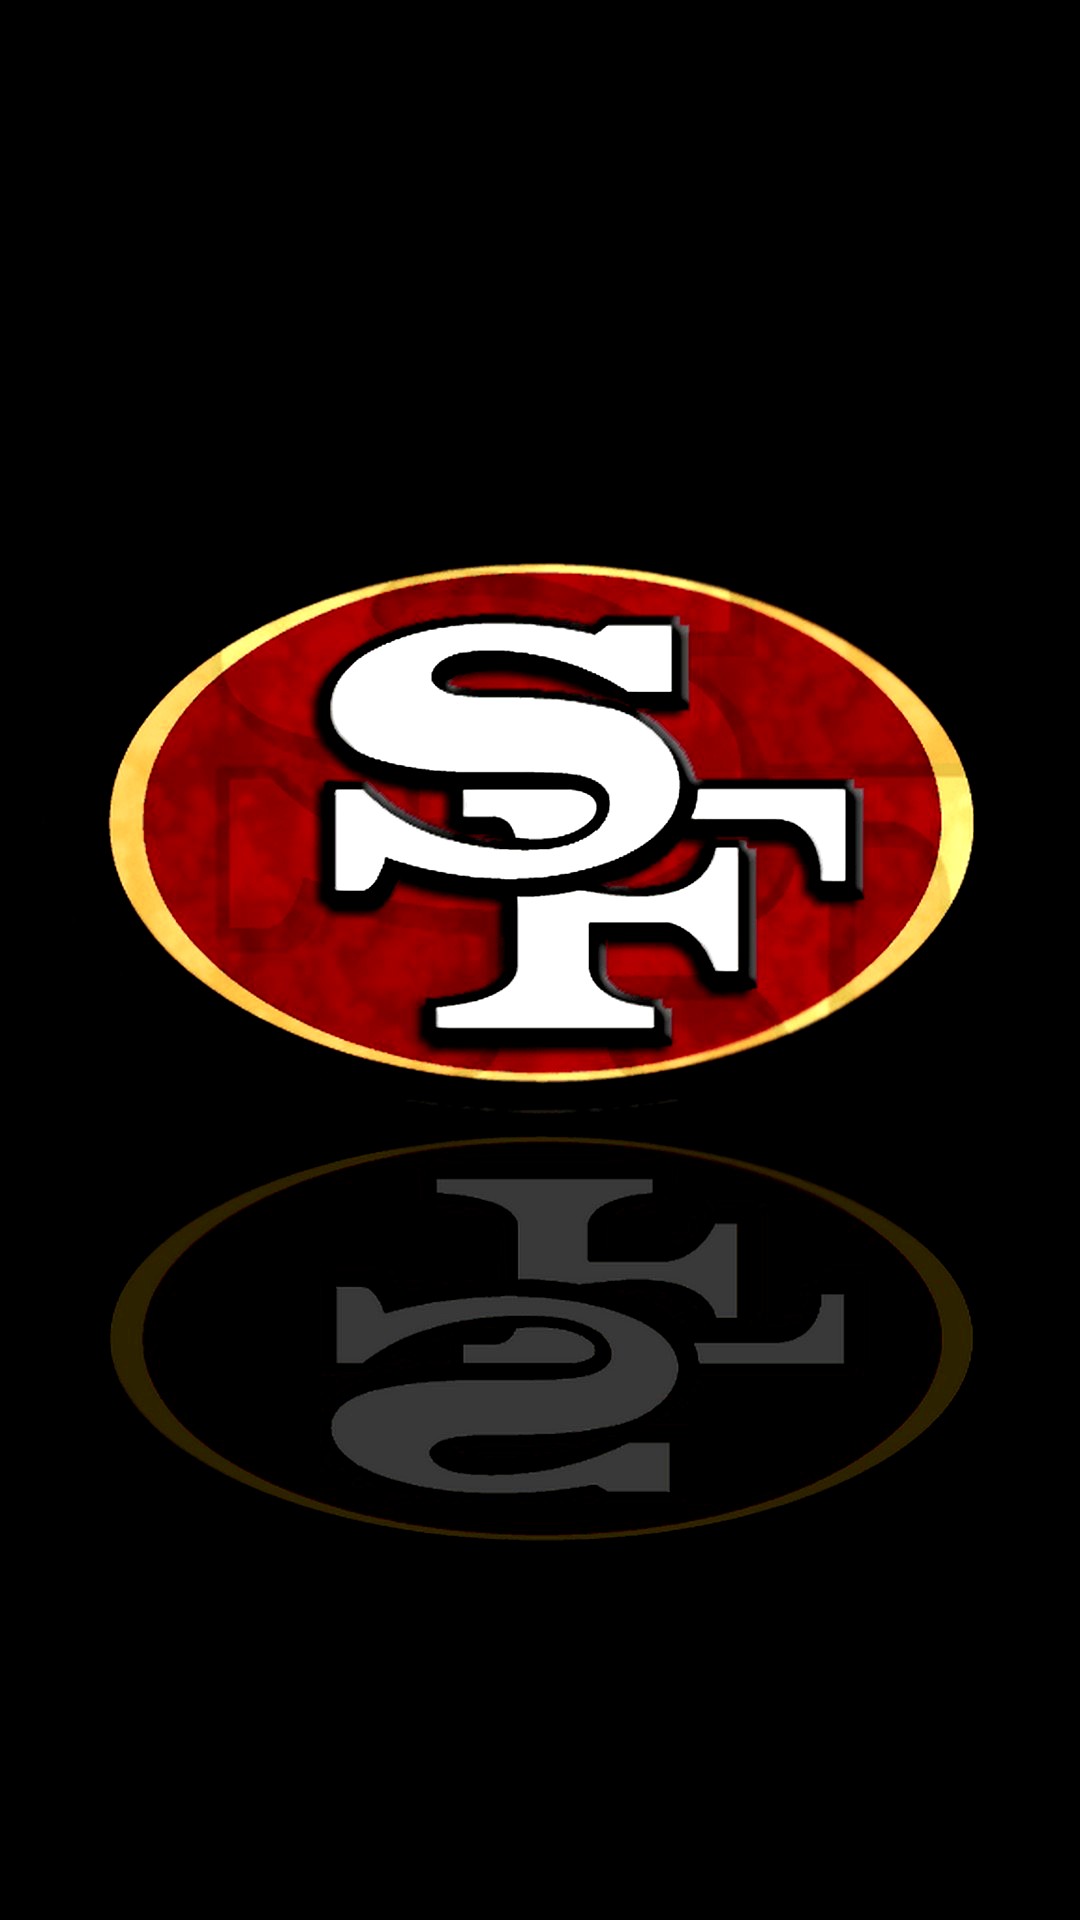 Wallpaper San Francisco 49ers iPhone with high-resolution 1080x1920 pixel. You can use this wallpaper for your Mac or Windows Desktop Background, iPhone, Android or Tablet and another Smartphone device